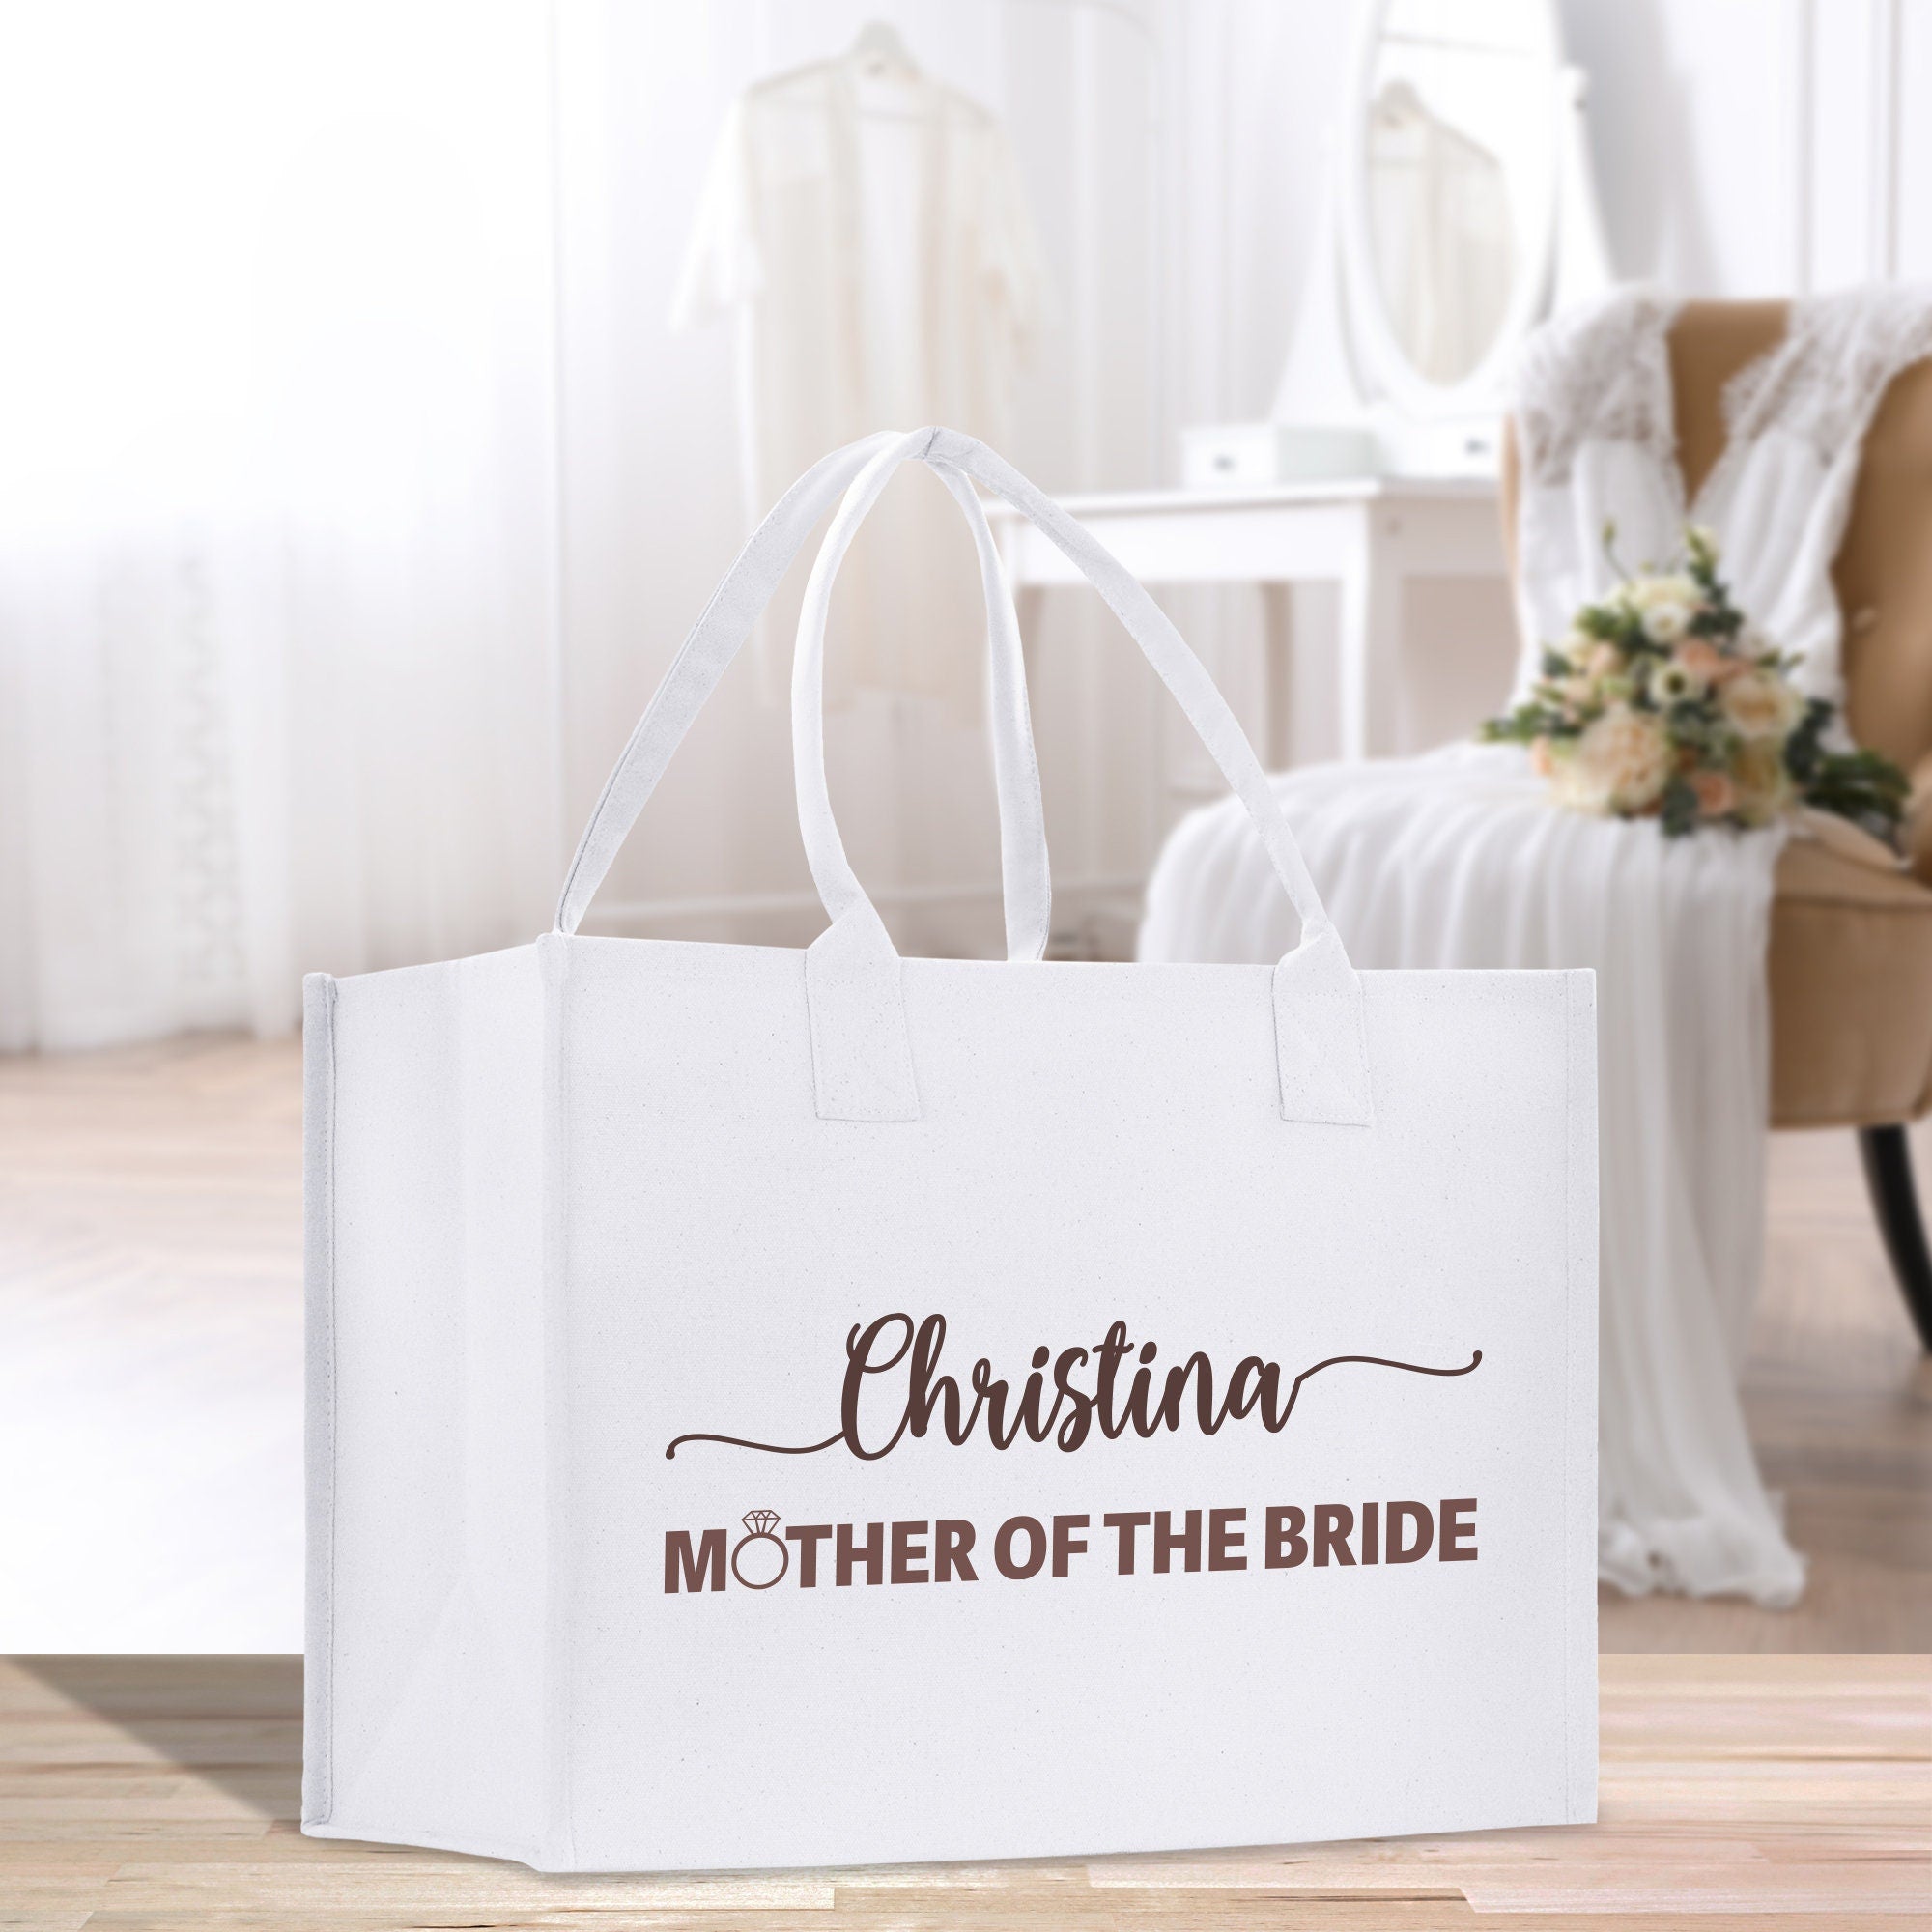 a mother of the bride bag sitting on the floor